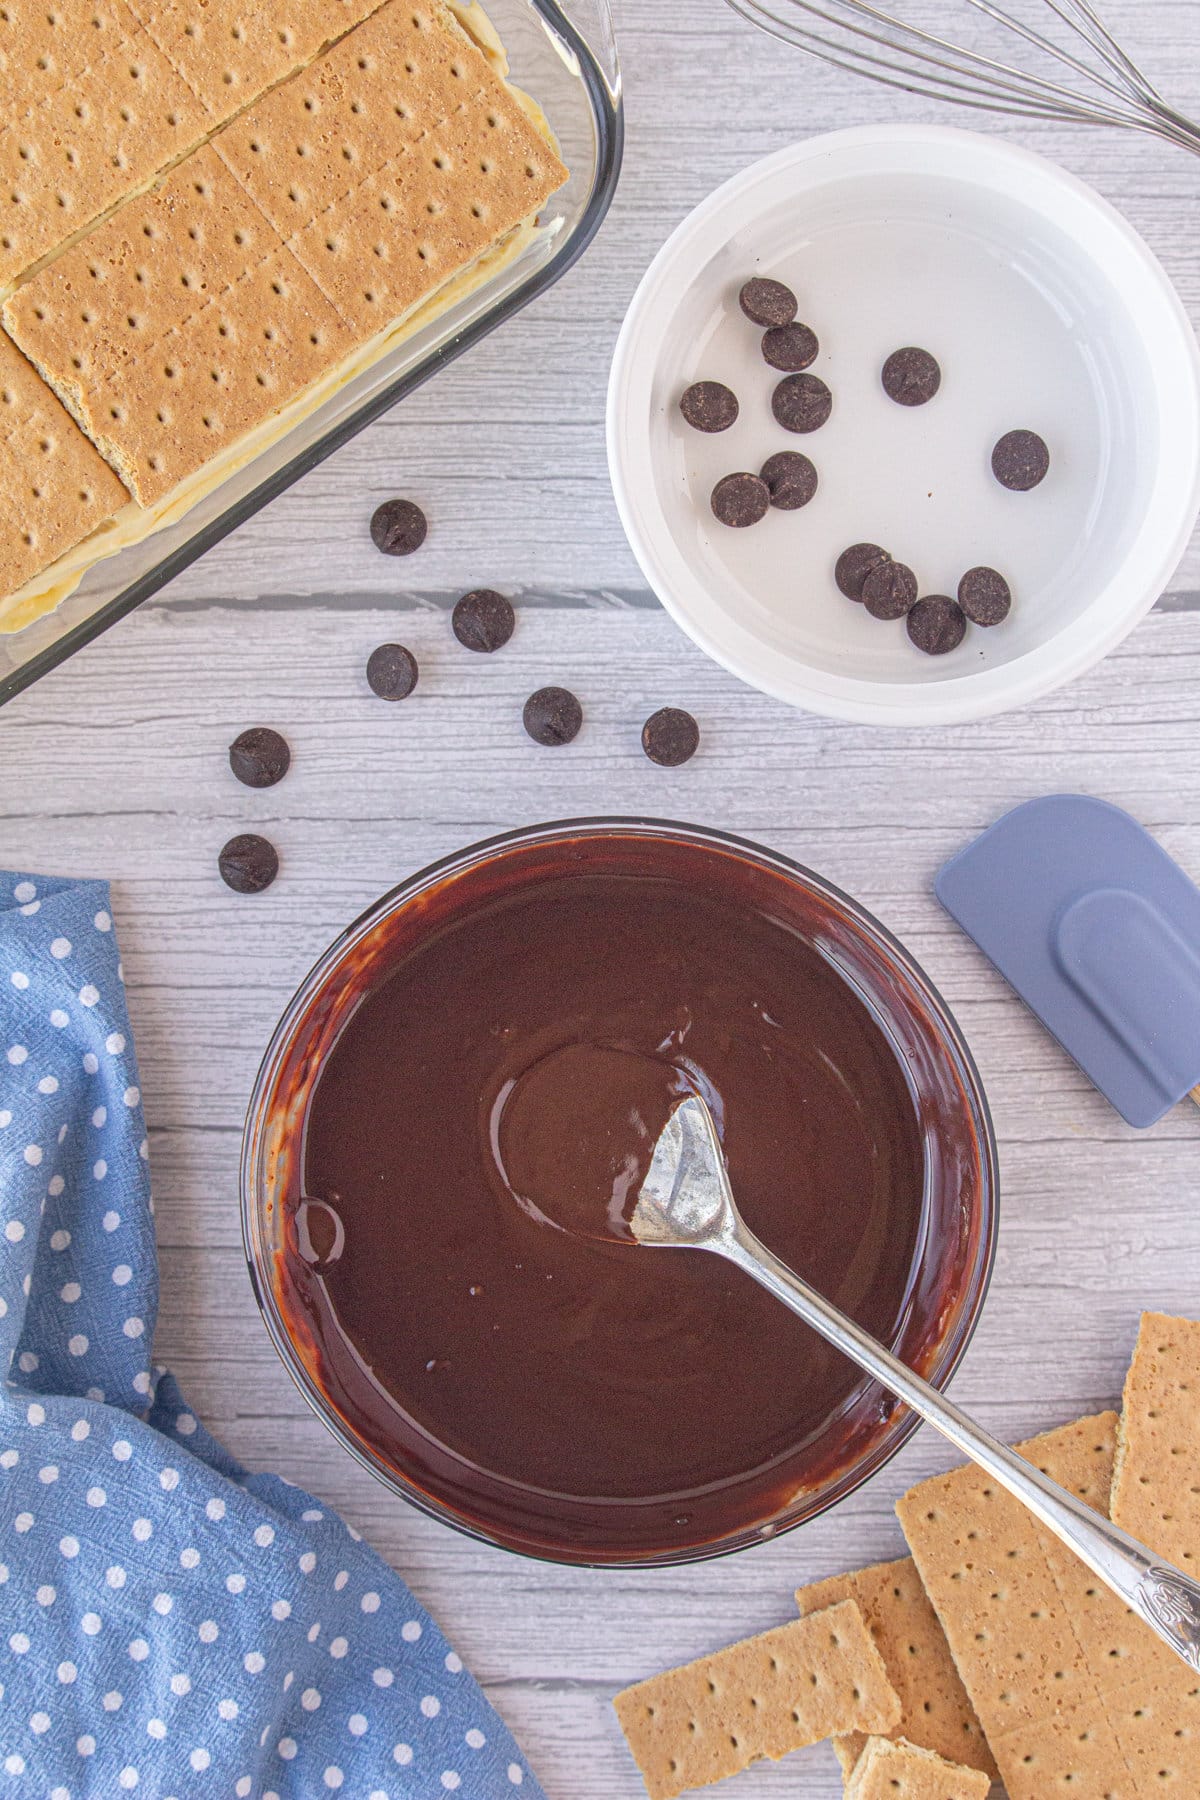 A bowl with chocolate ganache and a spoon.